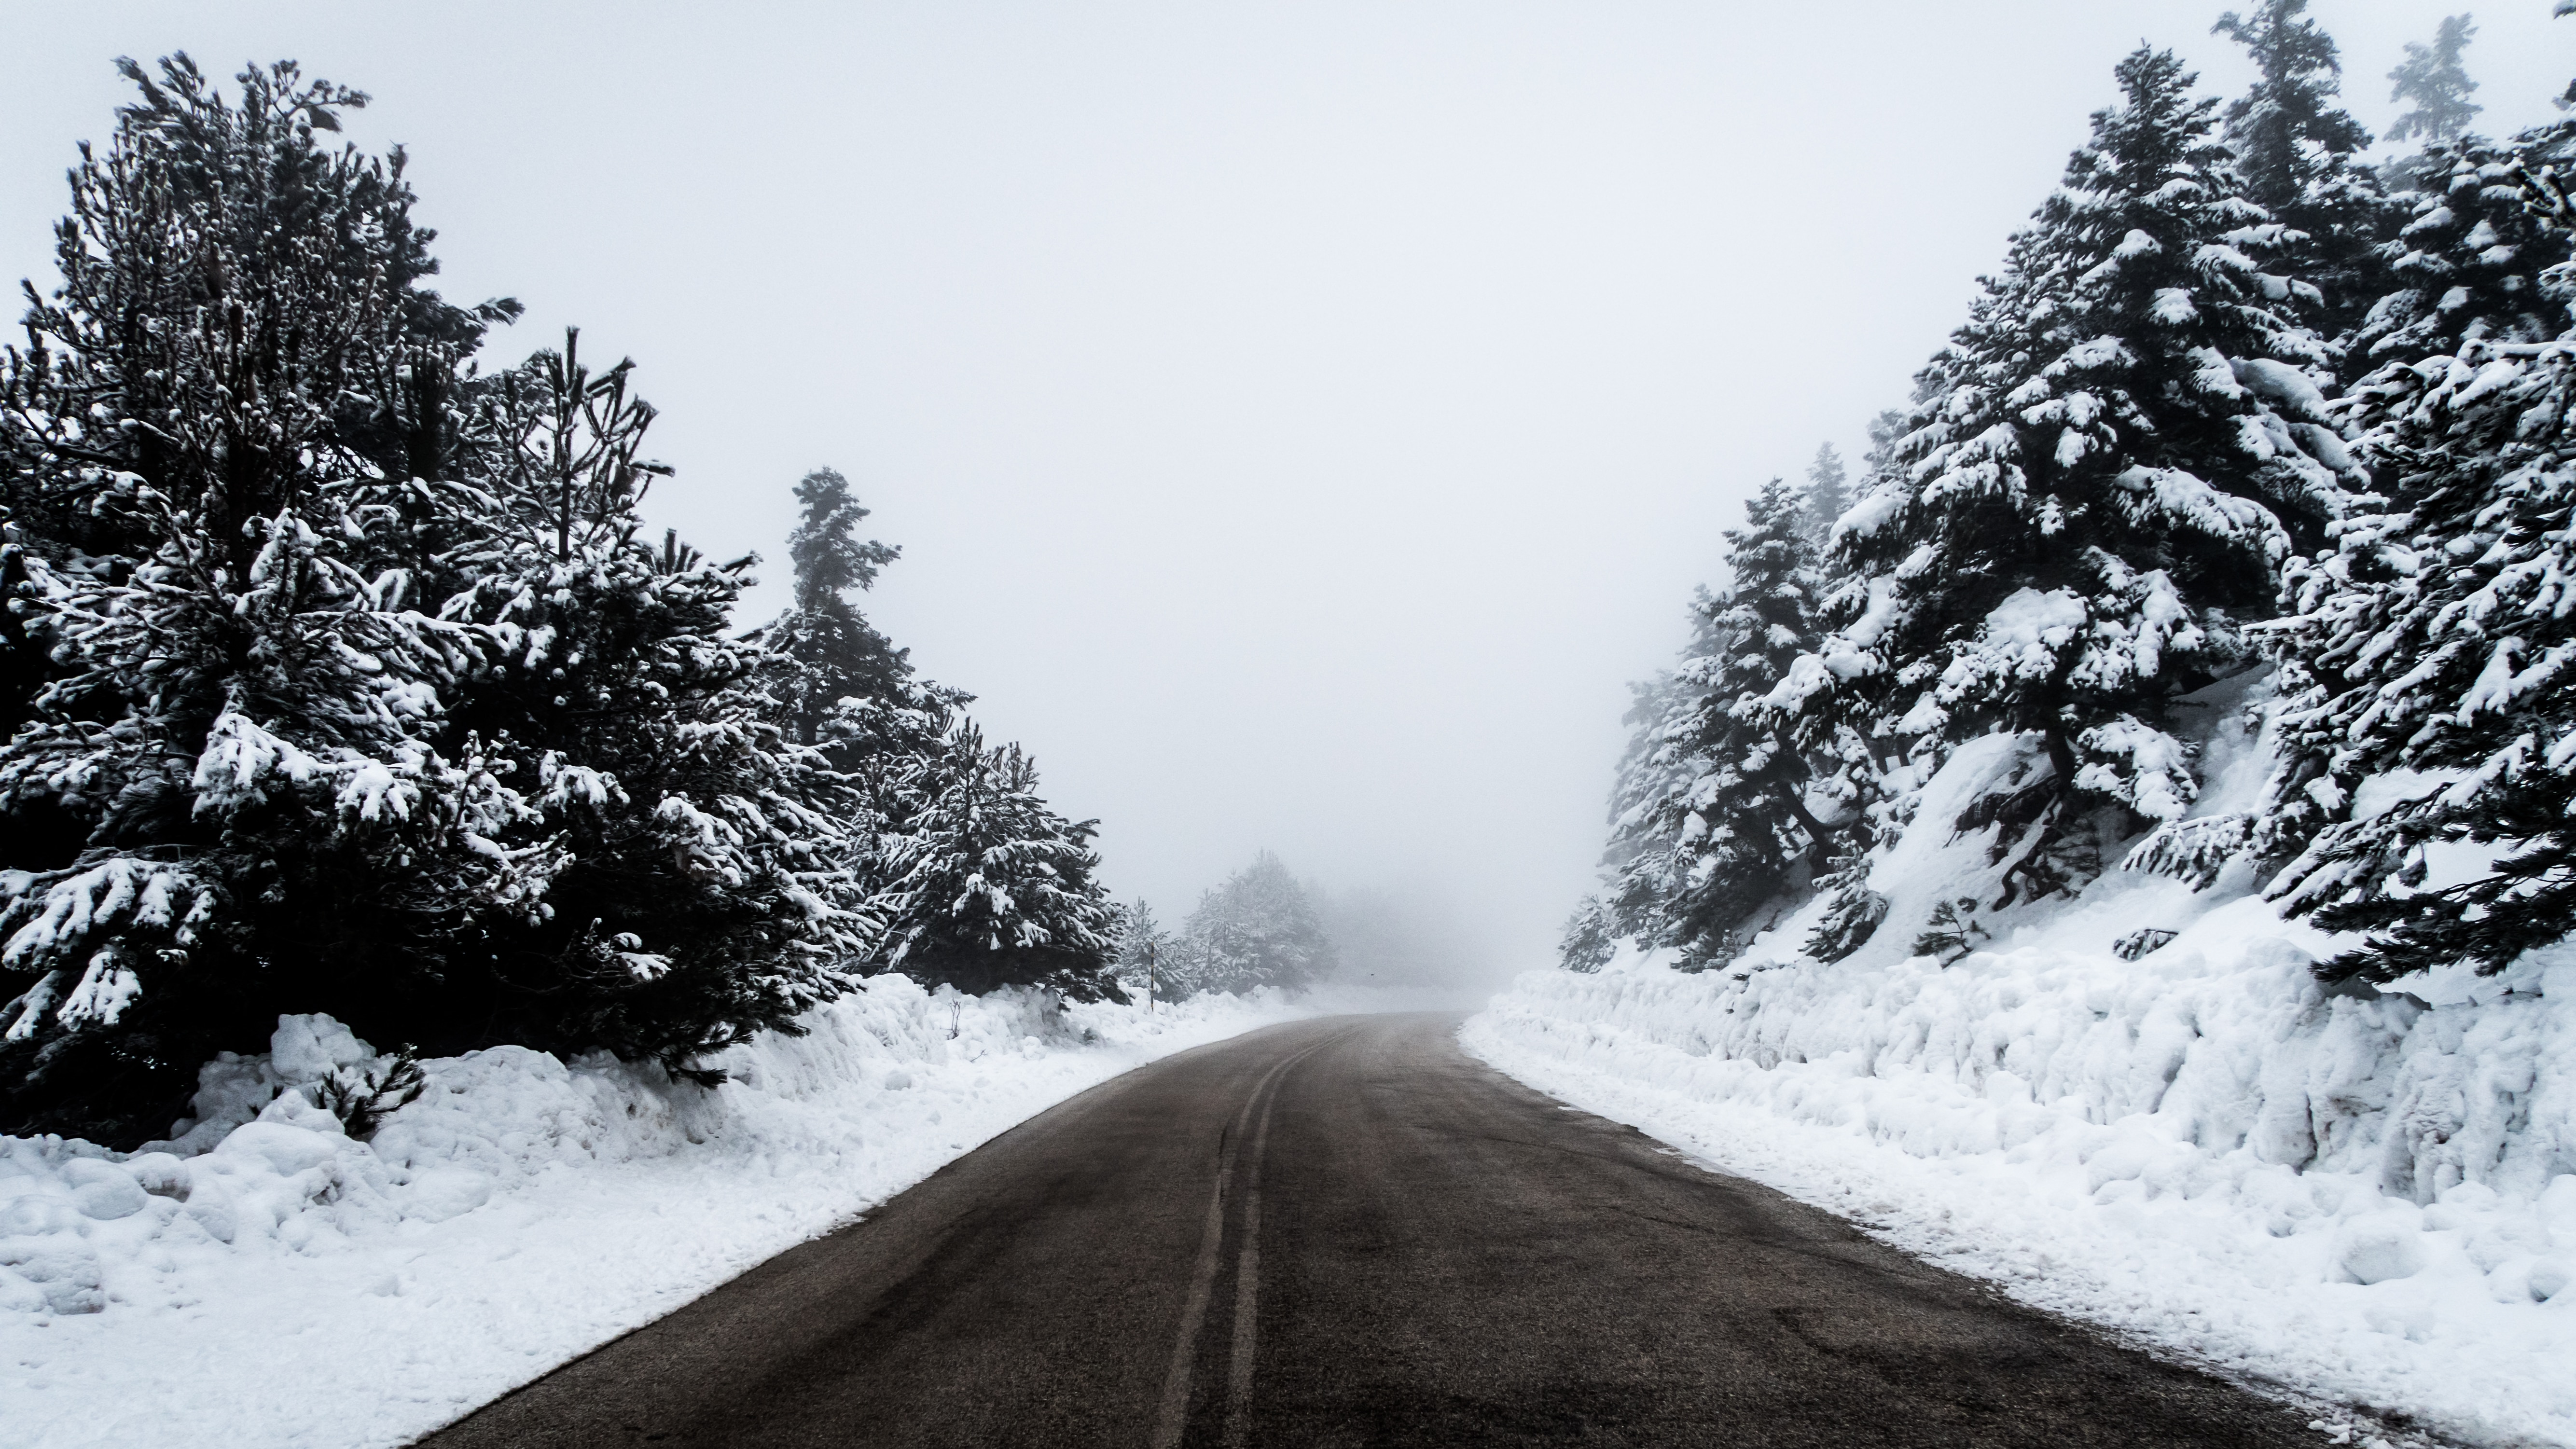 grayscale photography of road with snow and pine trees on side